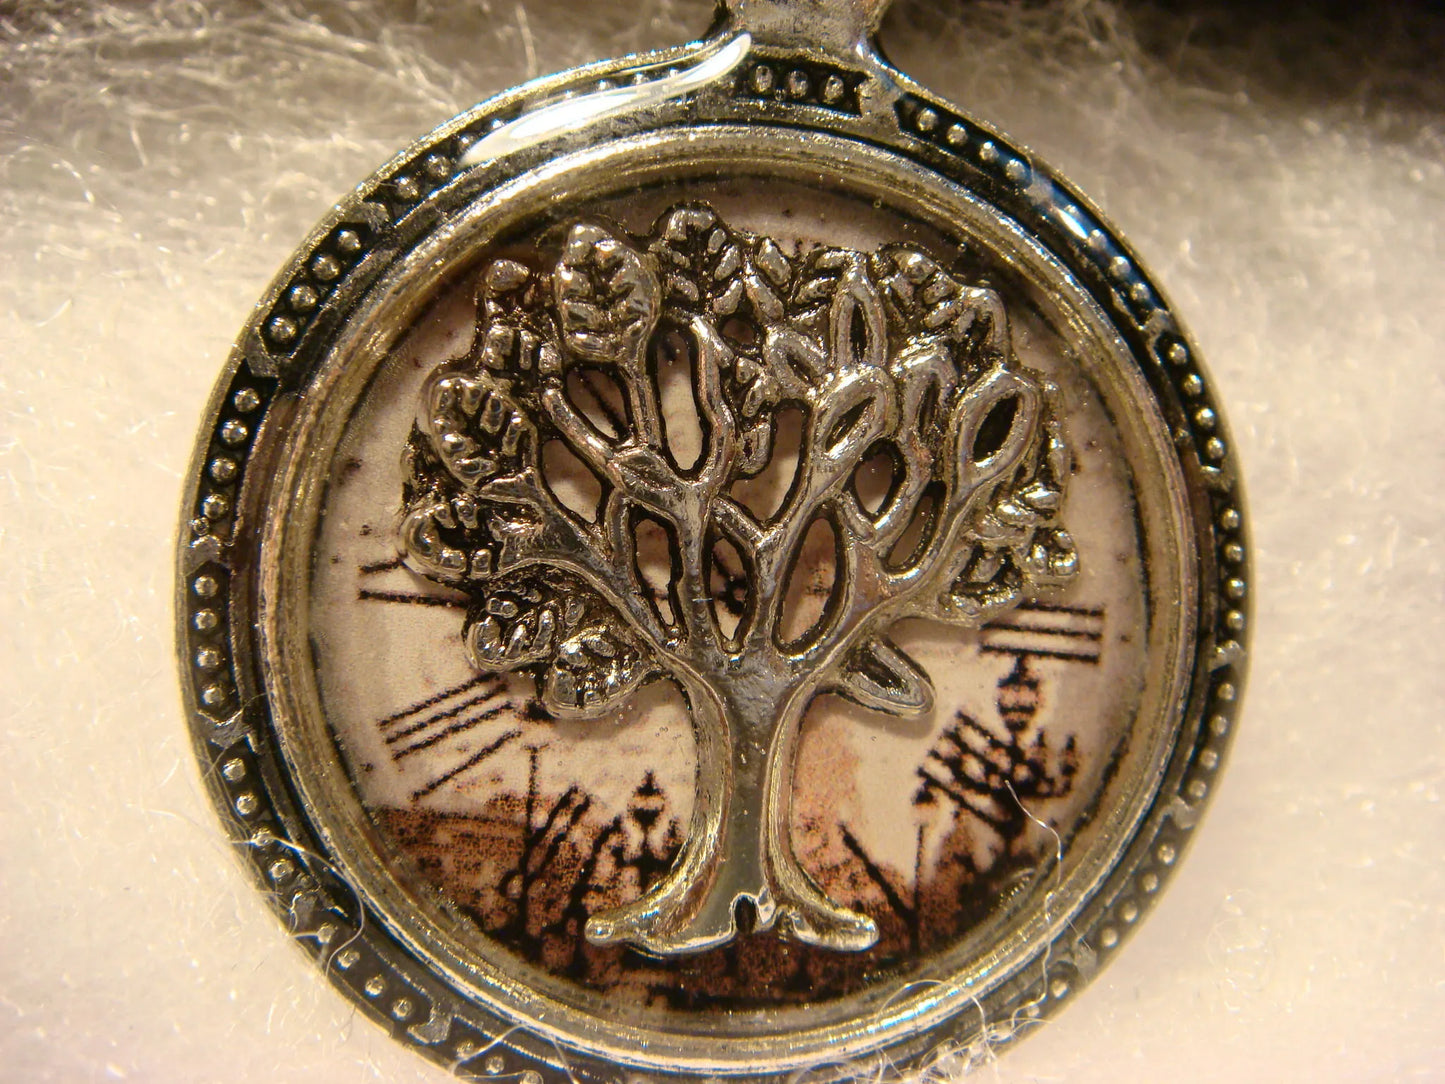 Tree of Life over Victorian Clock Pocket Watch Pendant Necklace